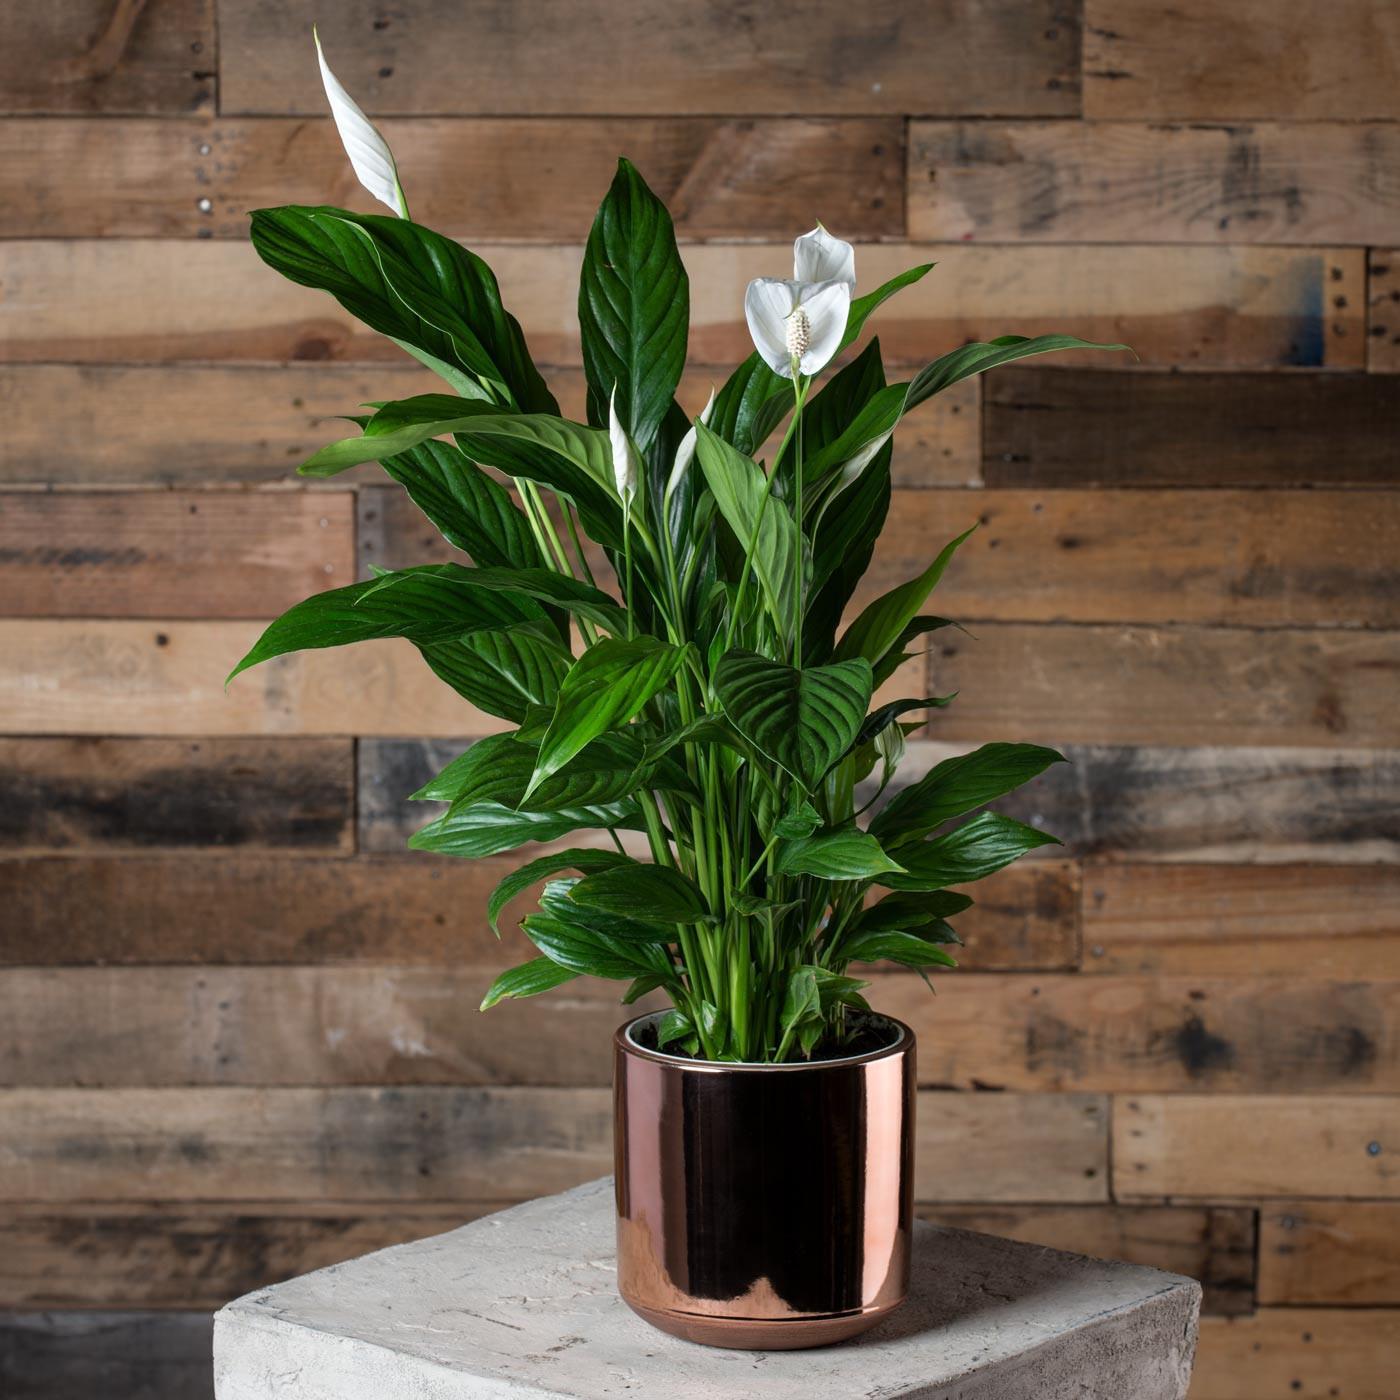 Pretty Fresh: The 5 Best Indoor Plants to Naturally Detoxify Your Home